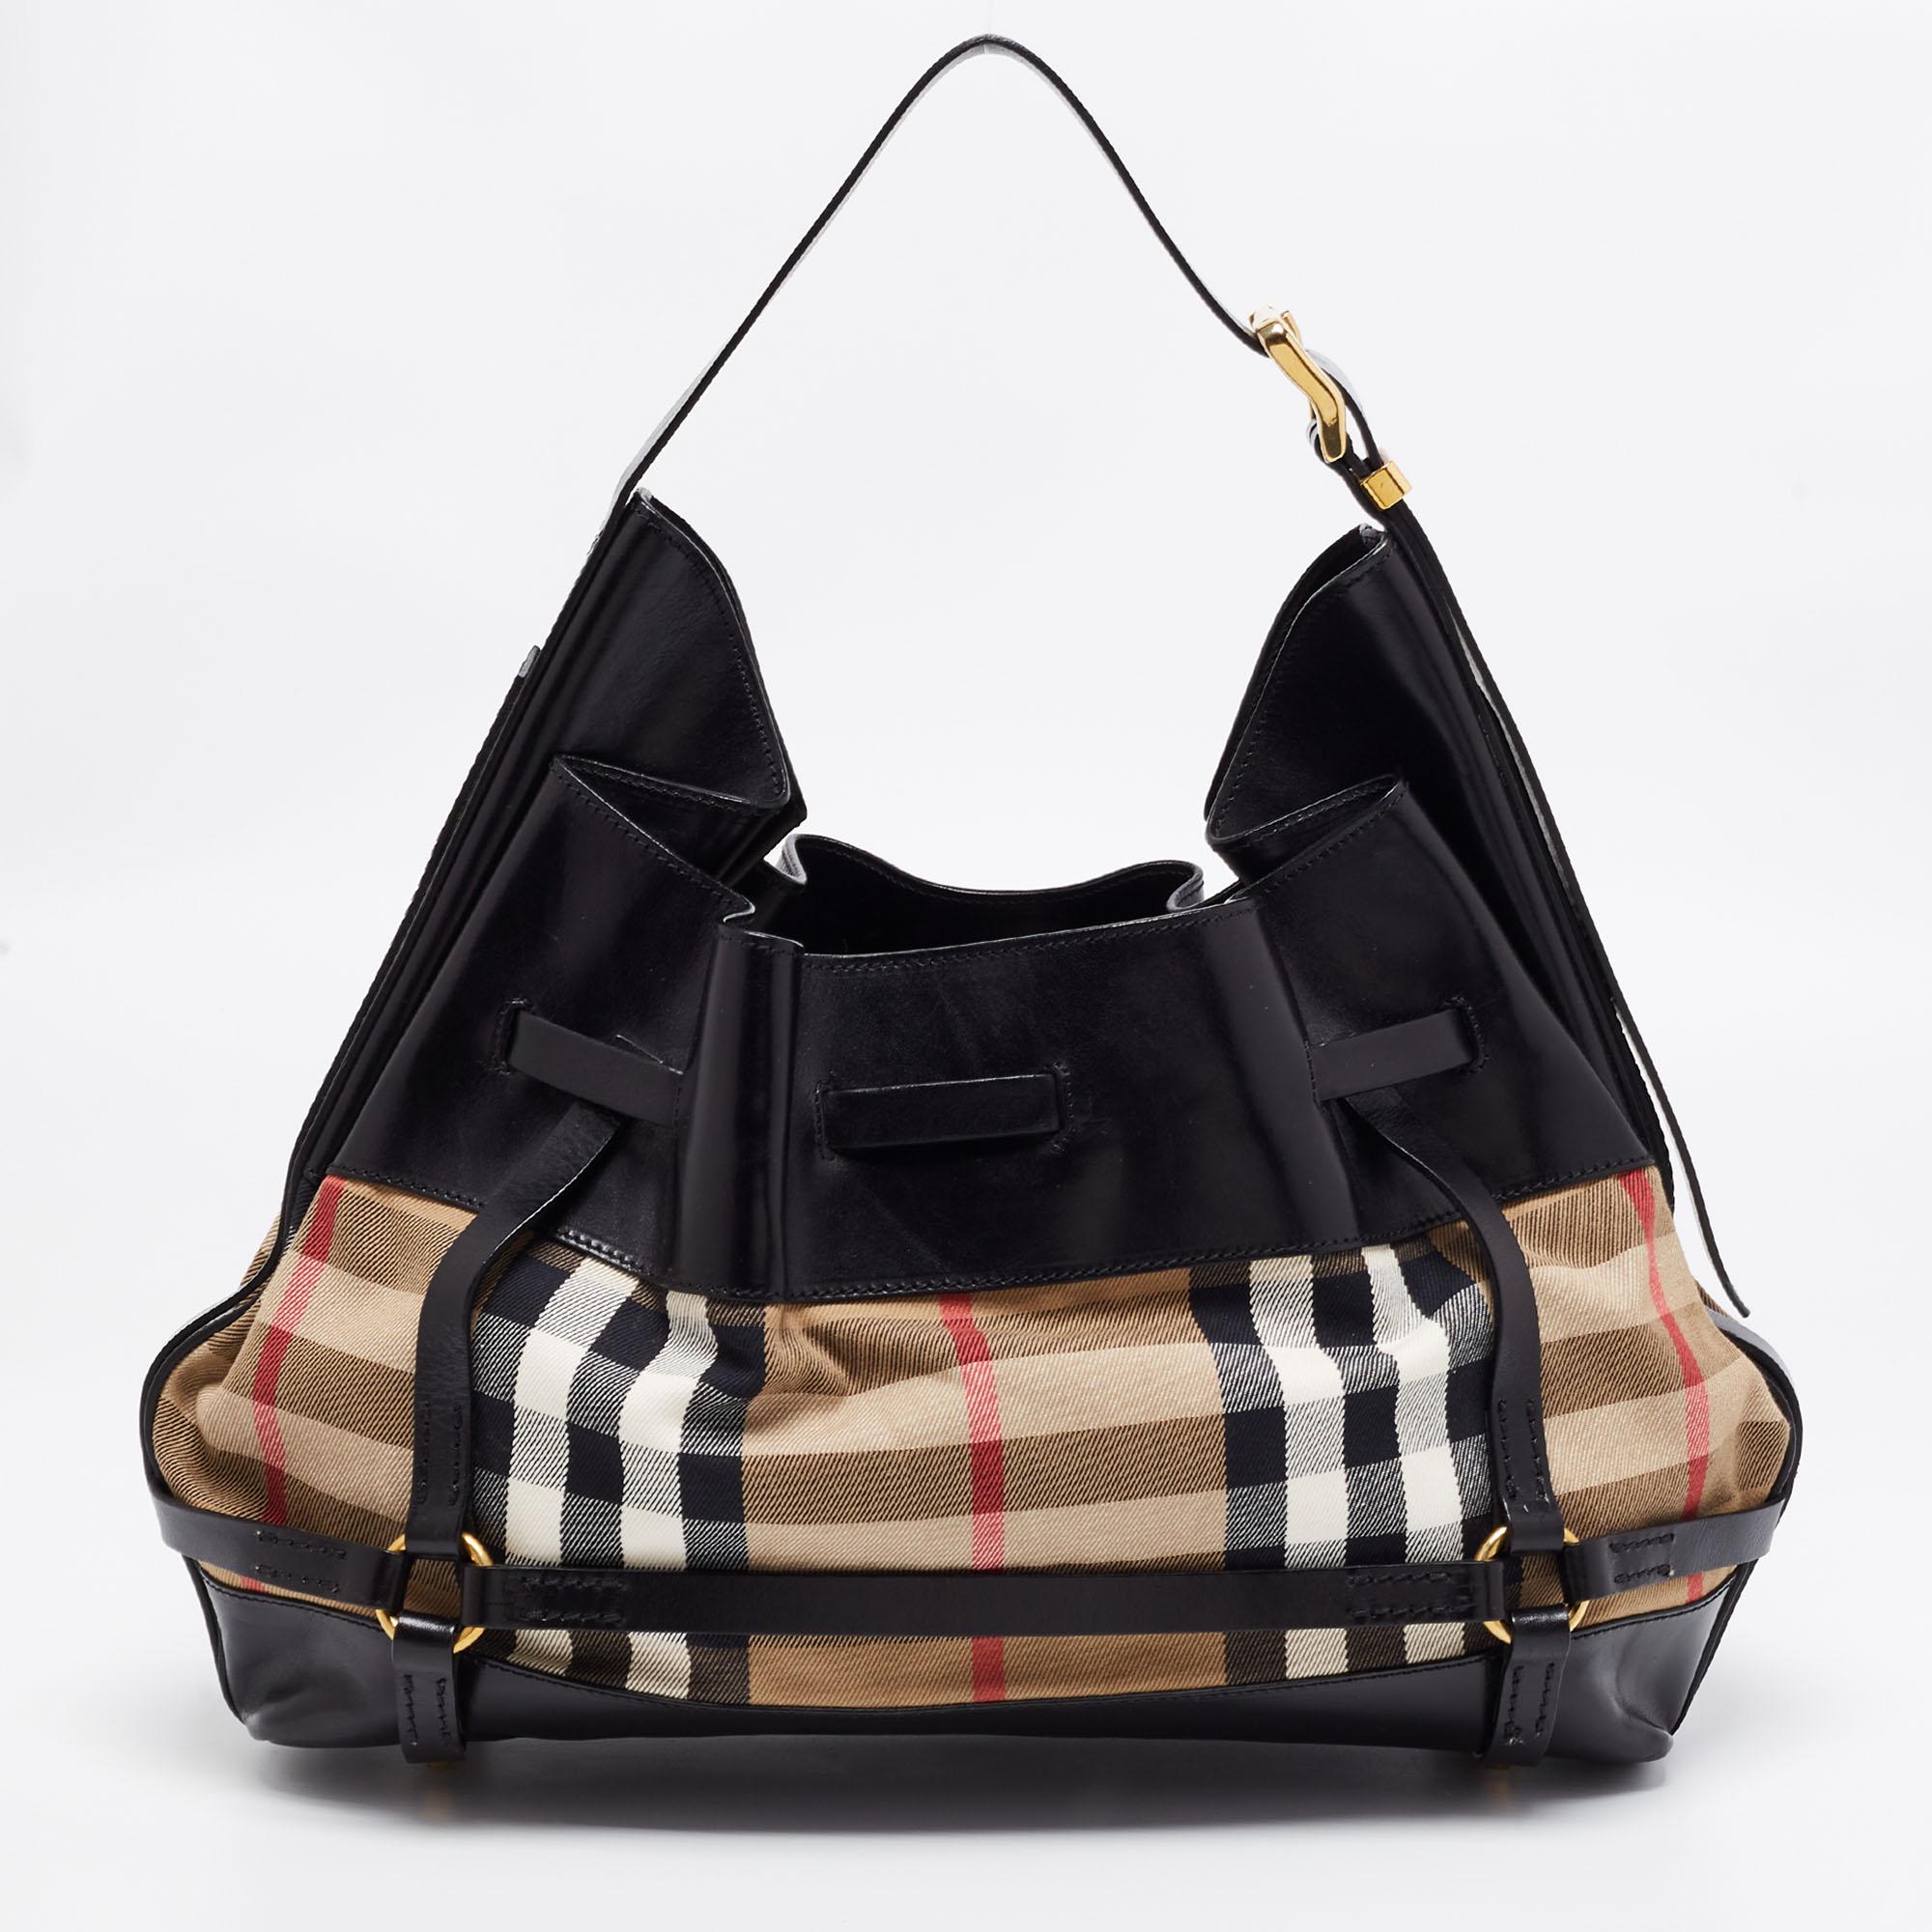 This stylish and functional hobo comes from the house of Burberry. Crafted in Italy, this bag has been made from leather and House Check canvas. It is styled with a single handle, buckled straps, and gold-tone hardware. It opens to a canvas interior